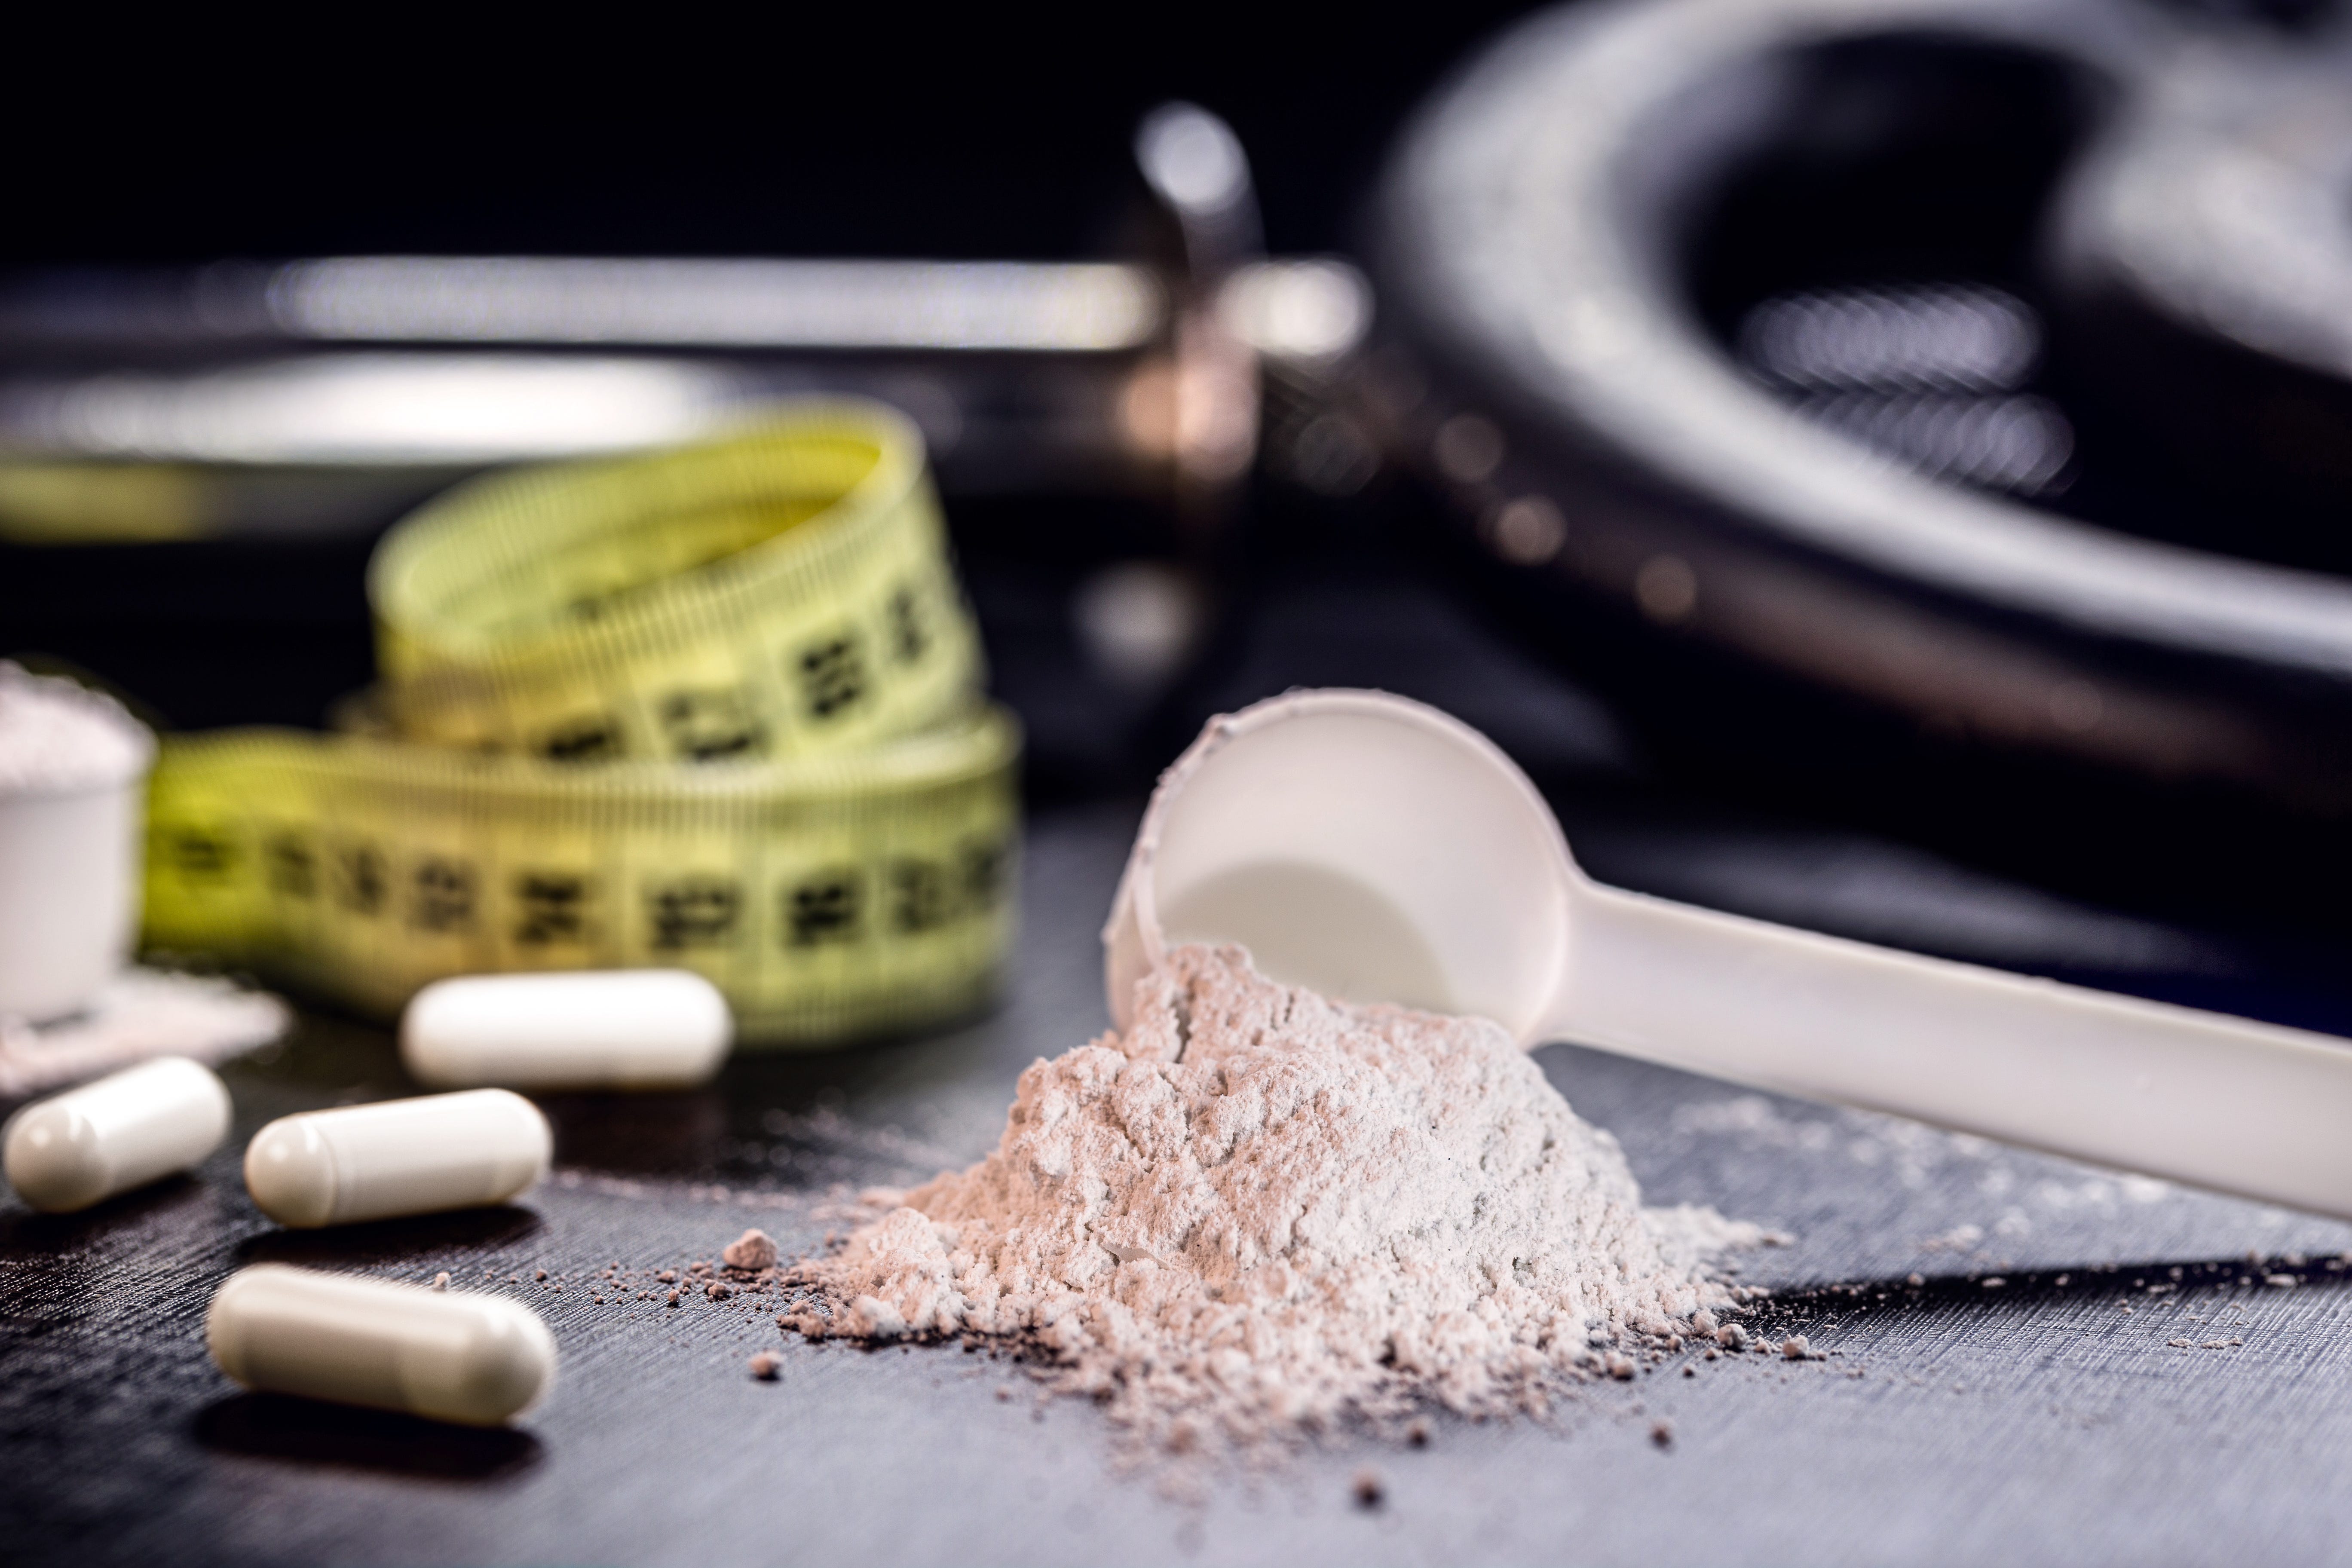 Creatine powder and capsules next to a dumbbell